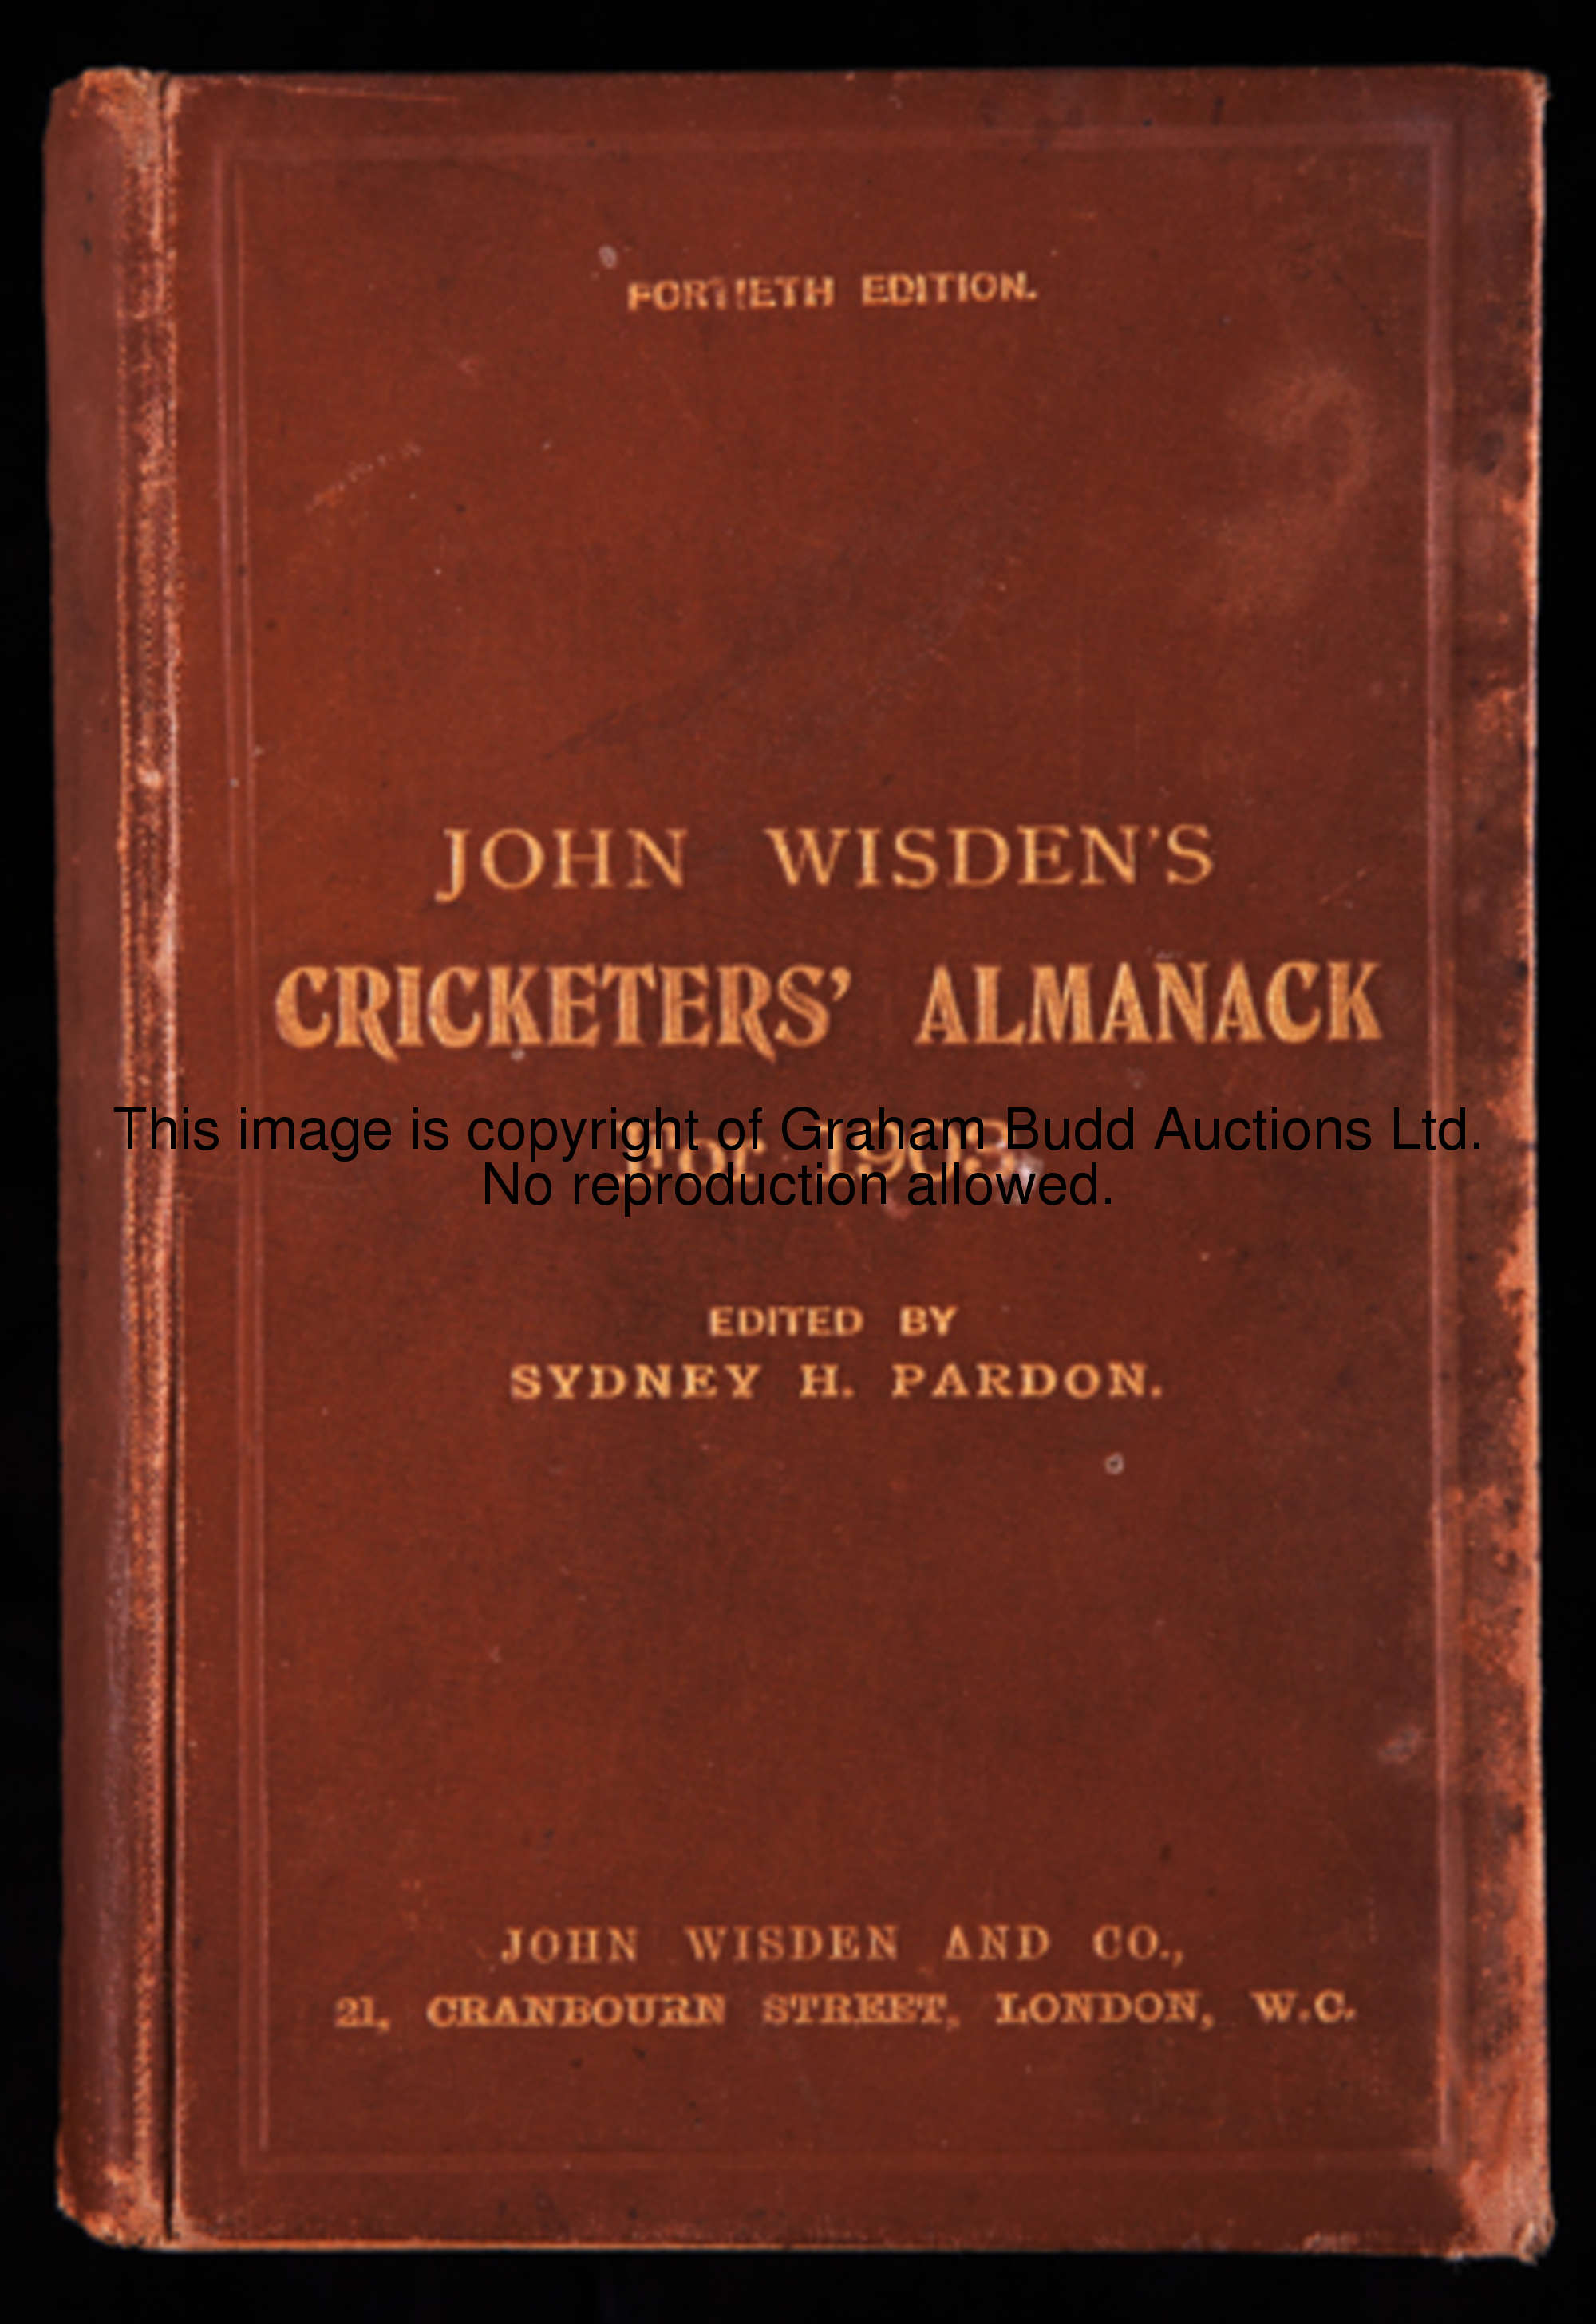 John Wisden's Cricketers' Almanack 1903 original hardback, wear to covers, loose at spine, lacking t...